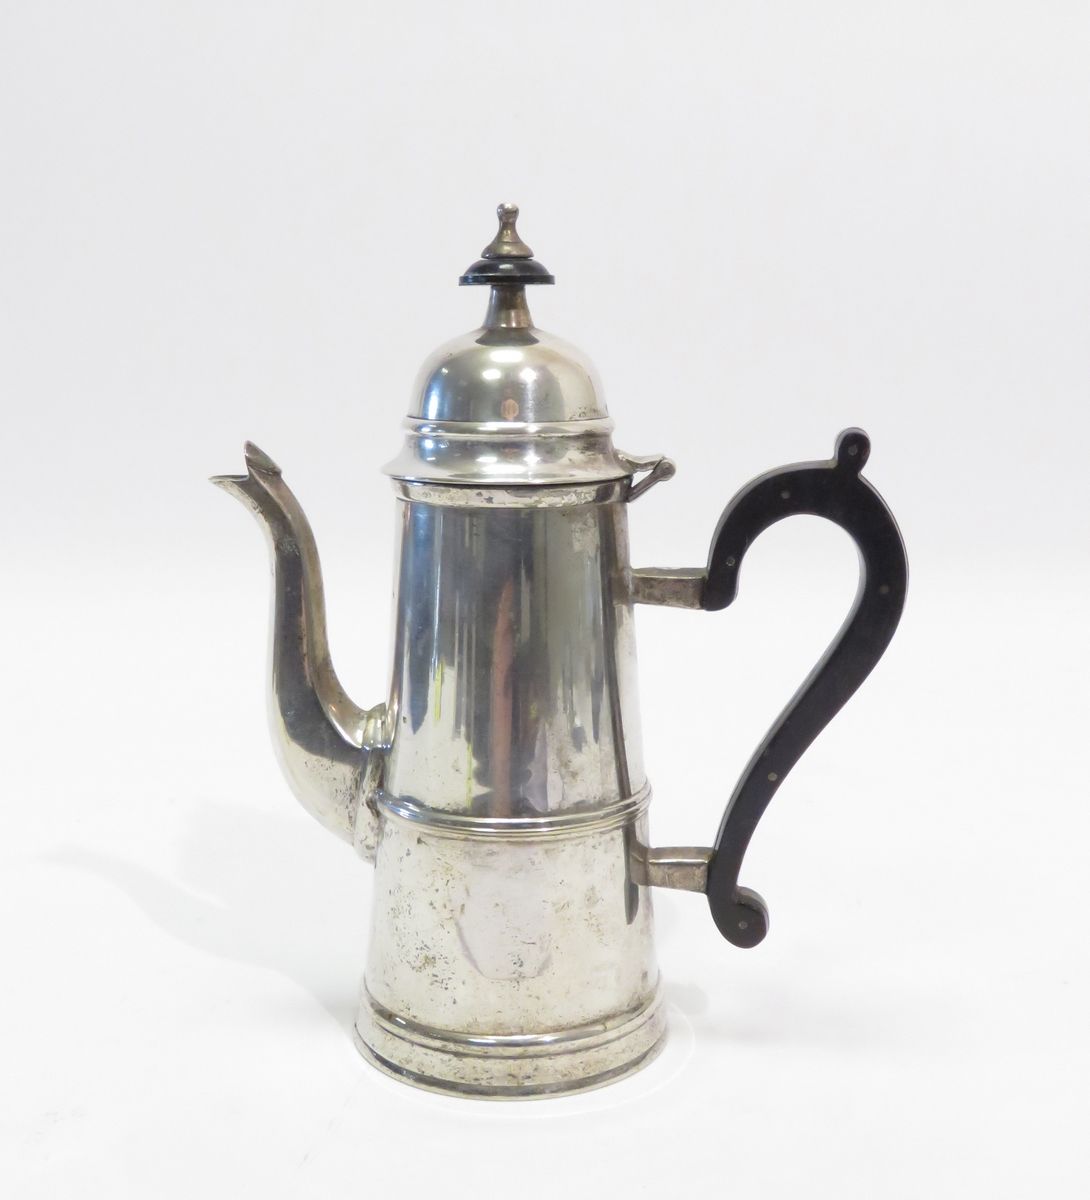 Null E.P.N.S. Small silver-plated teapot. 20th century. 19 x 15.5 cm.